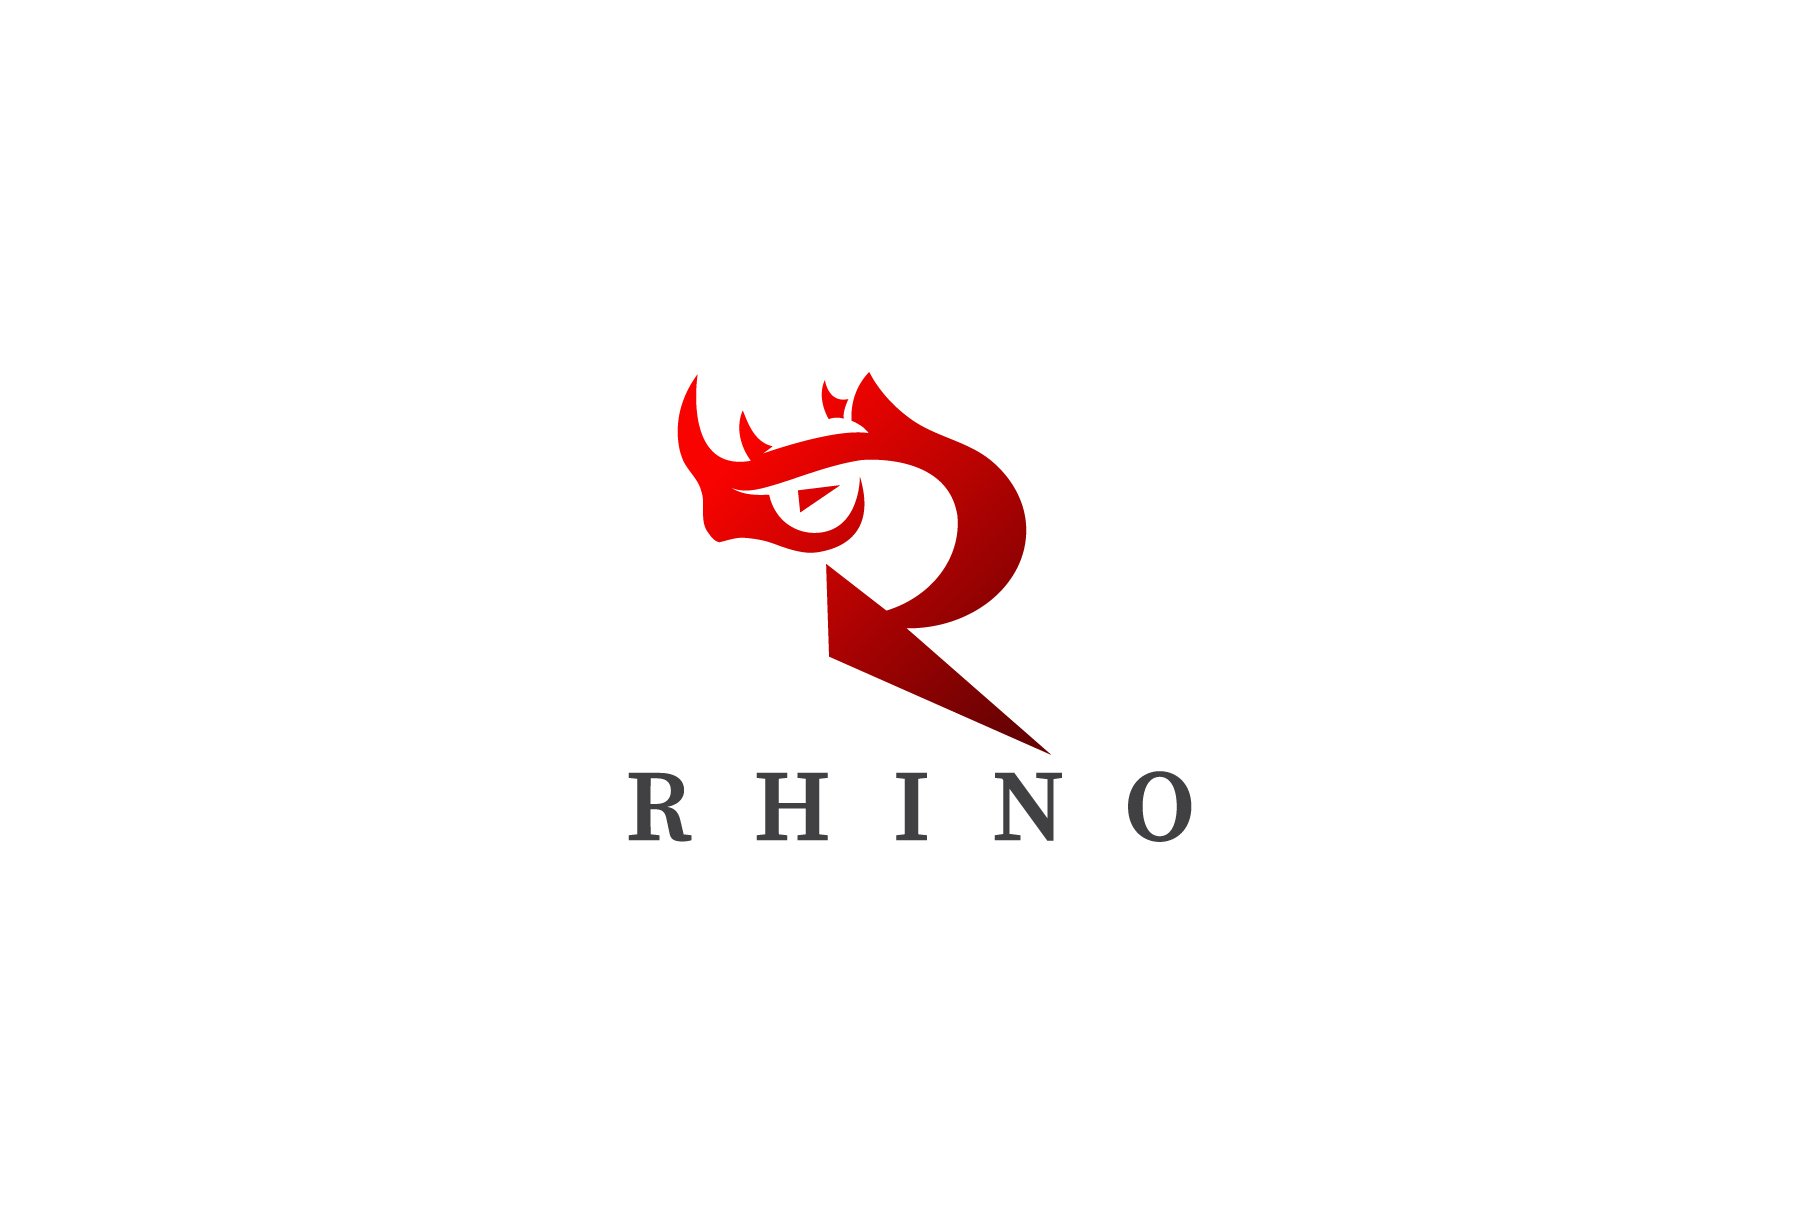 Red rhino logo in an abstract style.